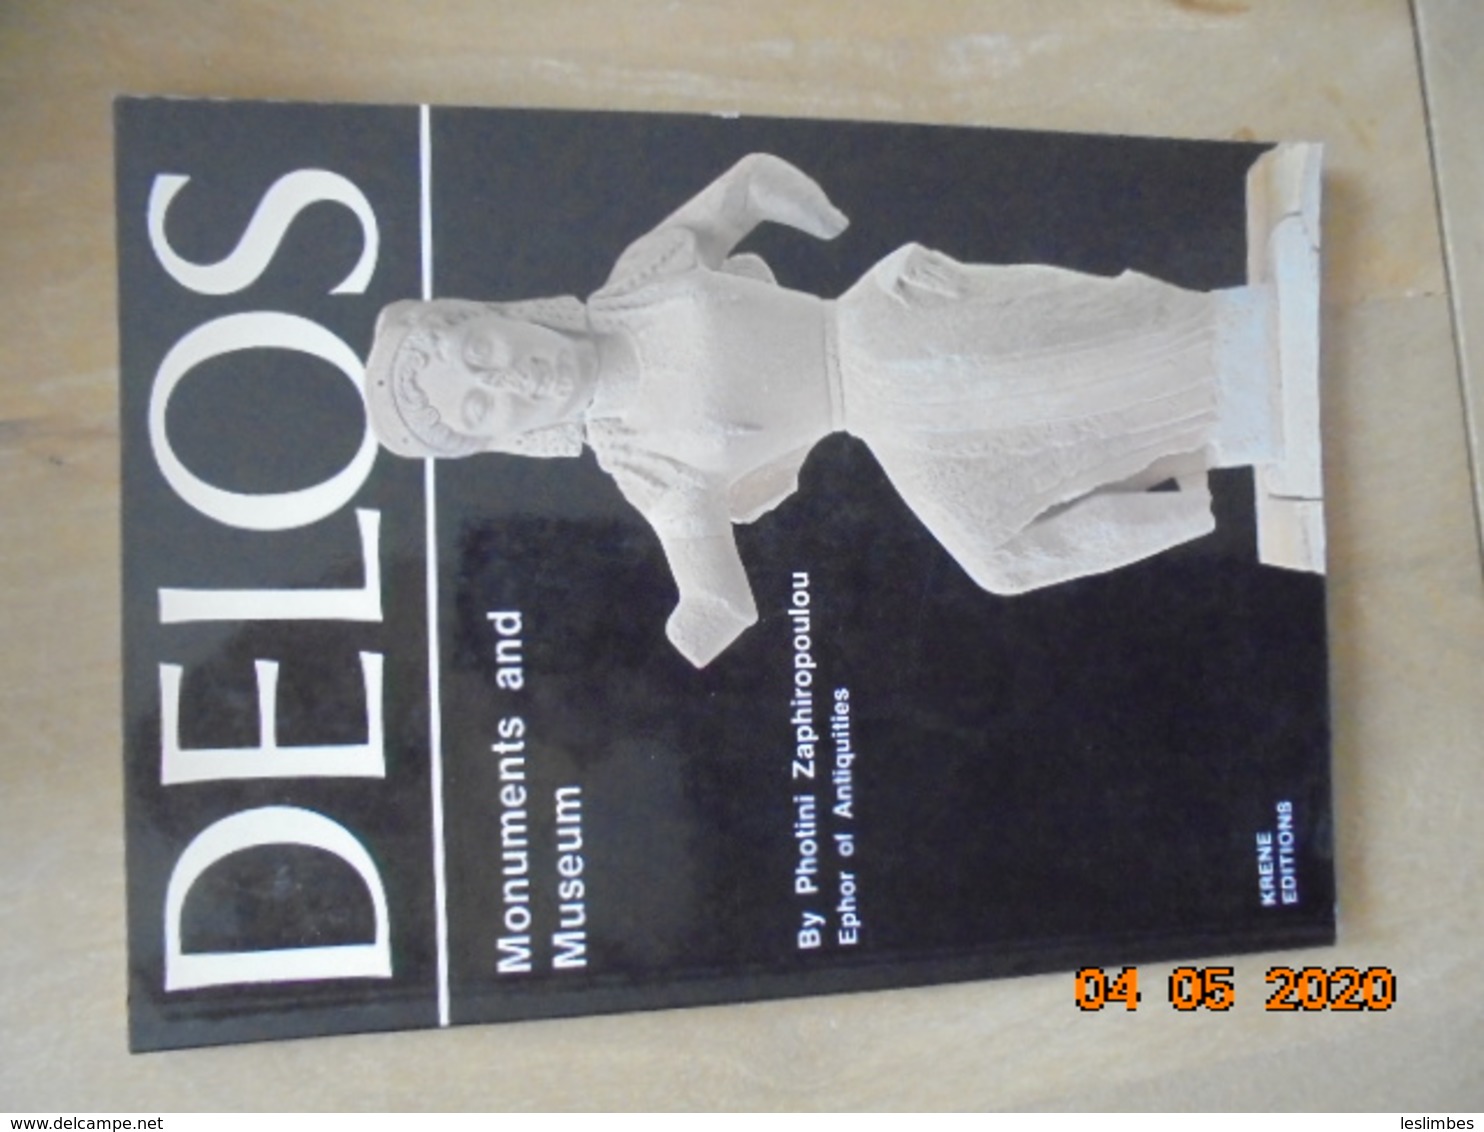 Delos: Monuments And Museum By Photini Zaphiropoulou. Krene Editions, 1983. Greece - Reisen